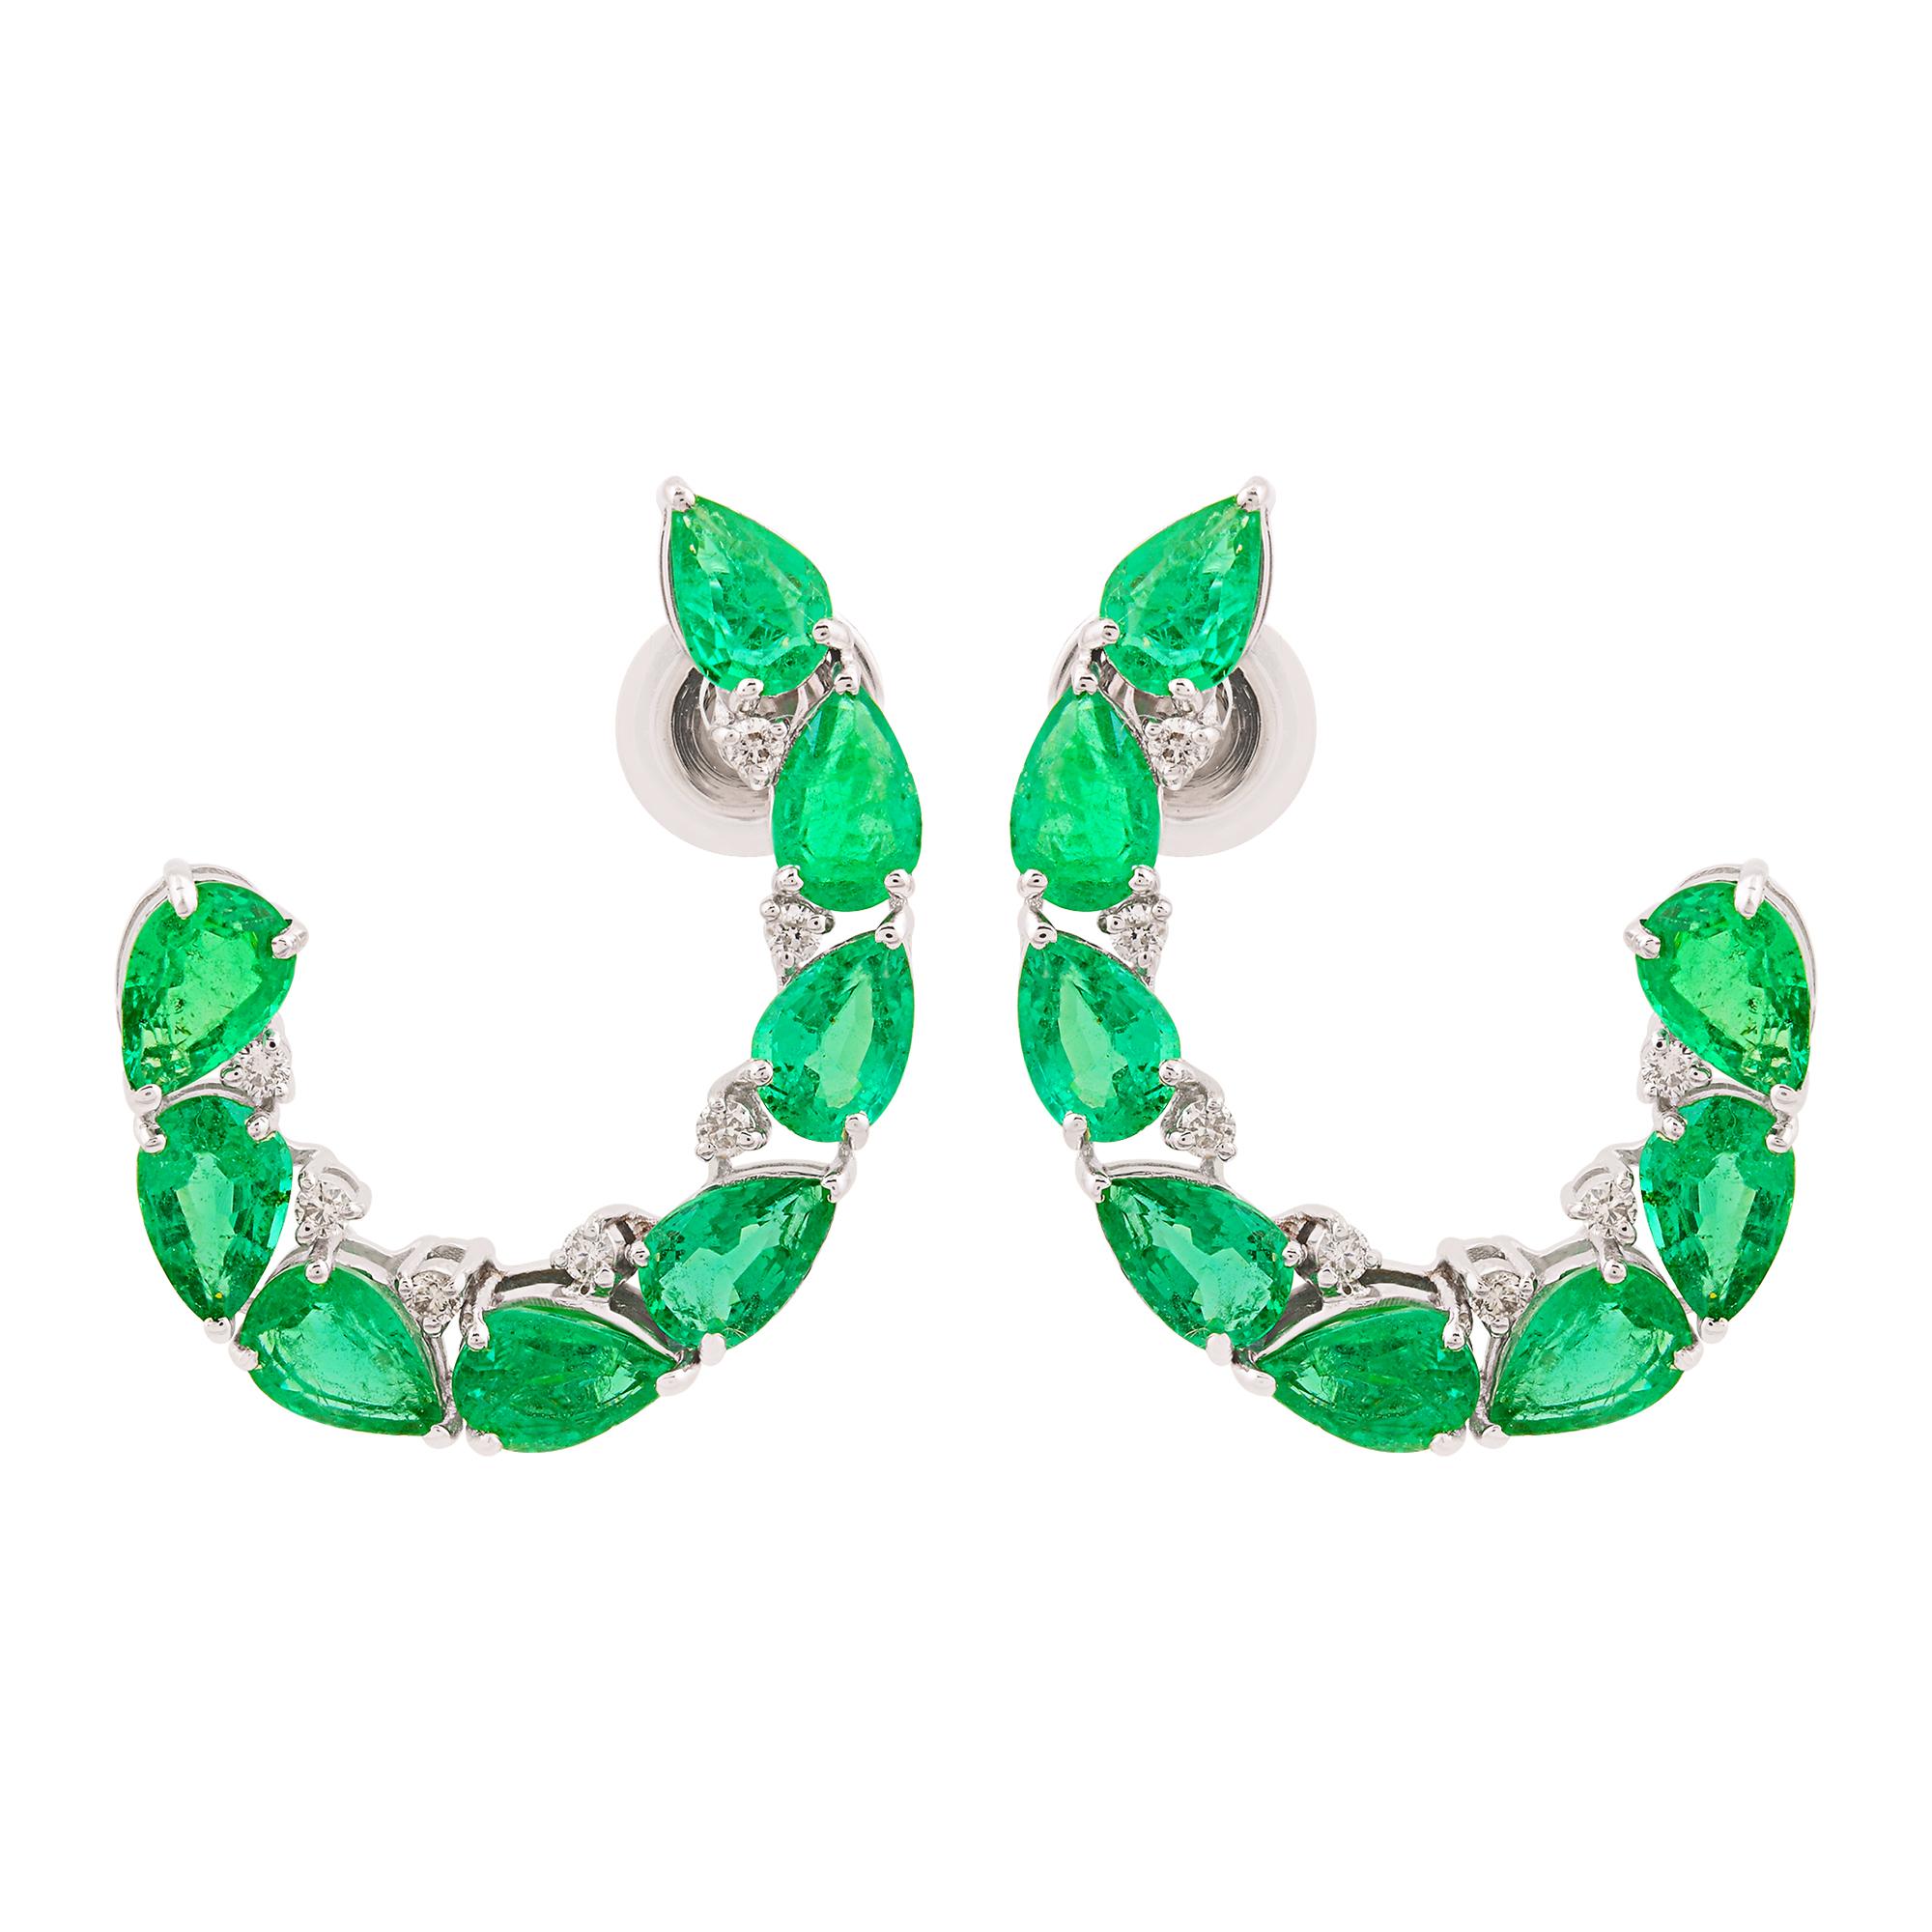 Item Code:- SEE-1191E (14k)
Gross Weight :- 5.45 gm
14k Solid White Gold Weight :- 4.26 gm
Natural Diamond Weight :- 0.18 ct.  ( AVERAGE DIAMOND CLARITY SI1-SI2 & COLOR H-I )
Zambian Emerald Weight :- 5.8 ct.
Earring Length: 23 mm (approx.)

✦